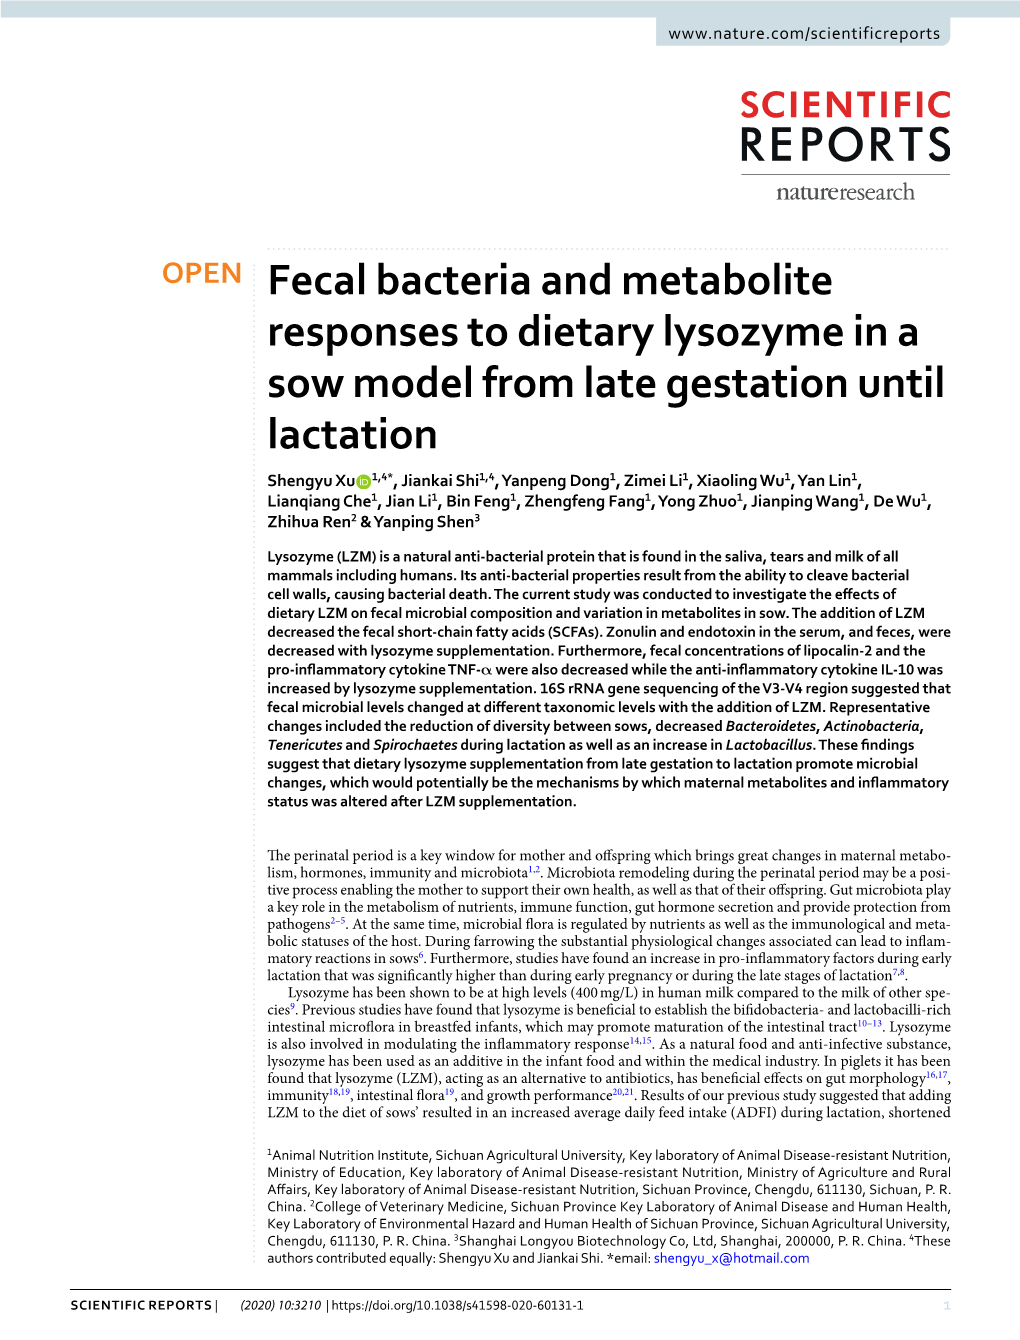 Fecal Bacteria and Metabolite Responses to Dietary Lysozyme in A